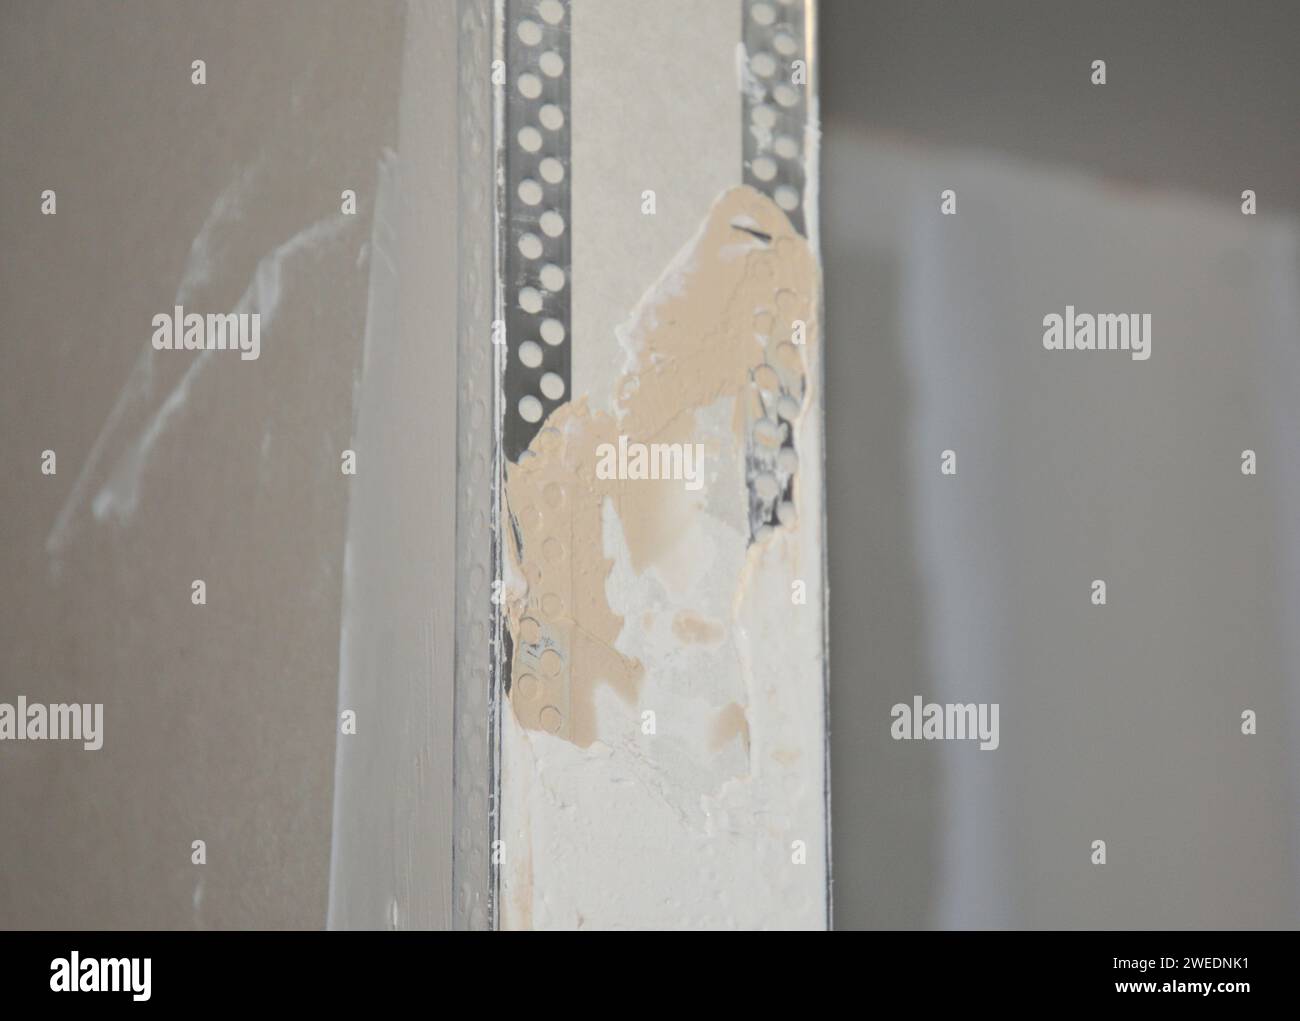 Plastering drywall corner: A close-up on plastering a drywall partition wall over installed angle beads during house renovation. Stock Photo